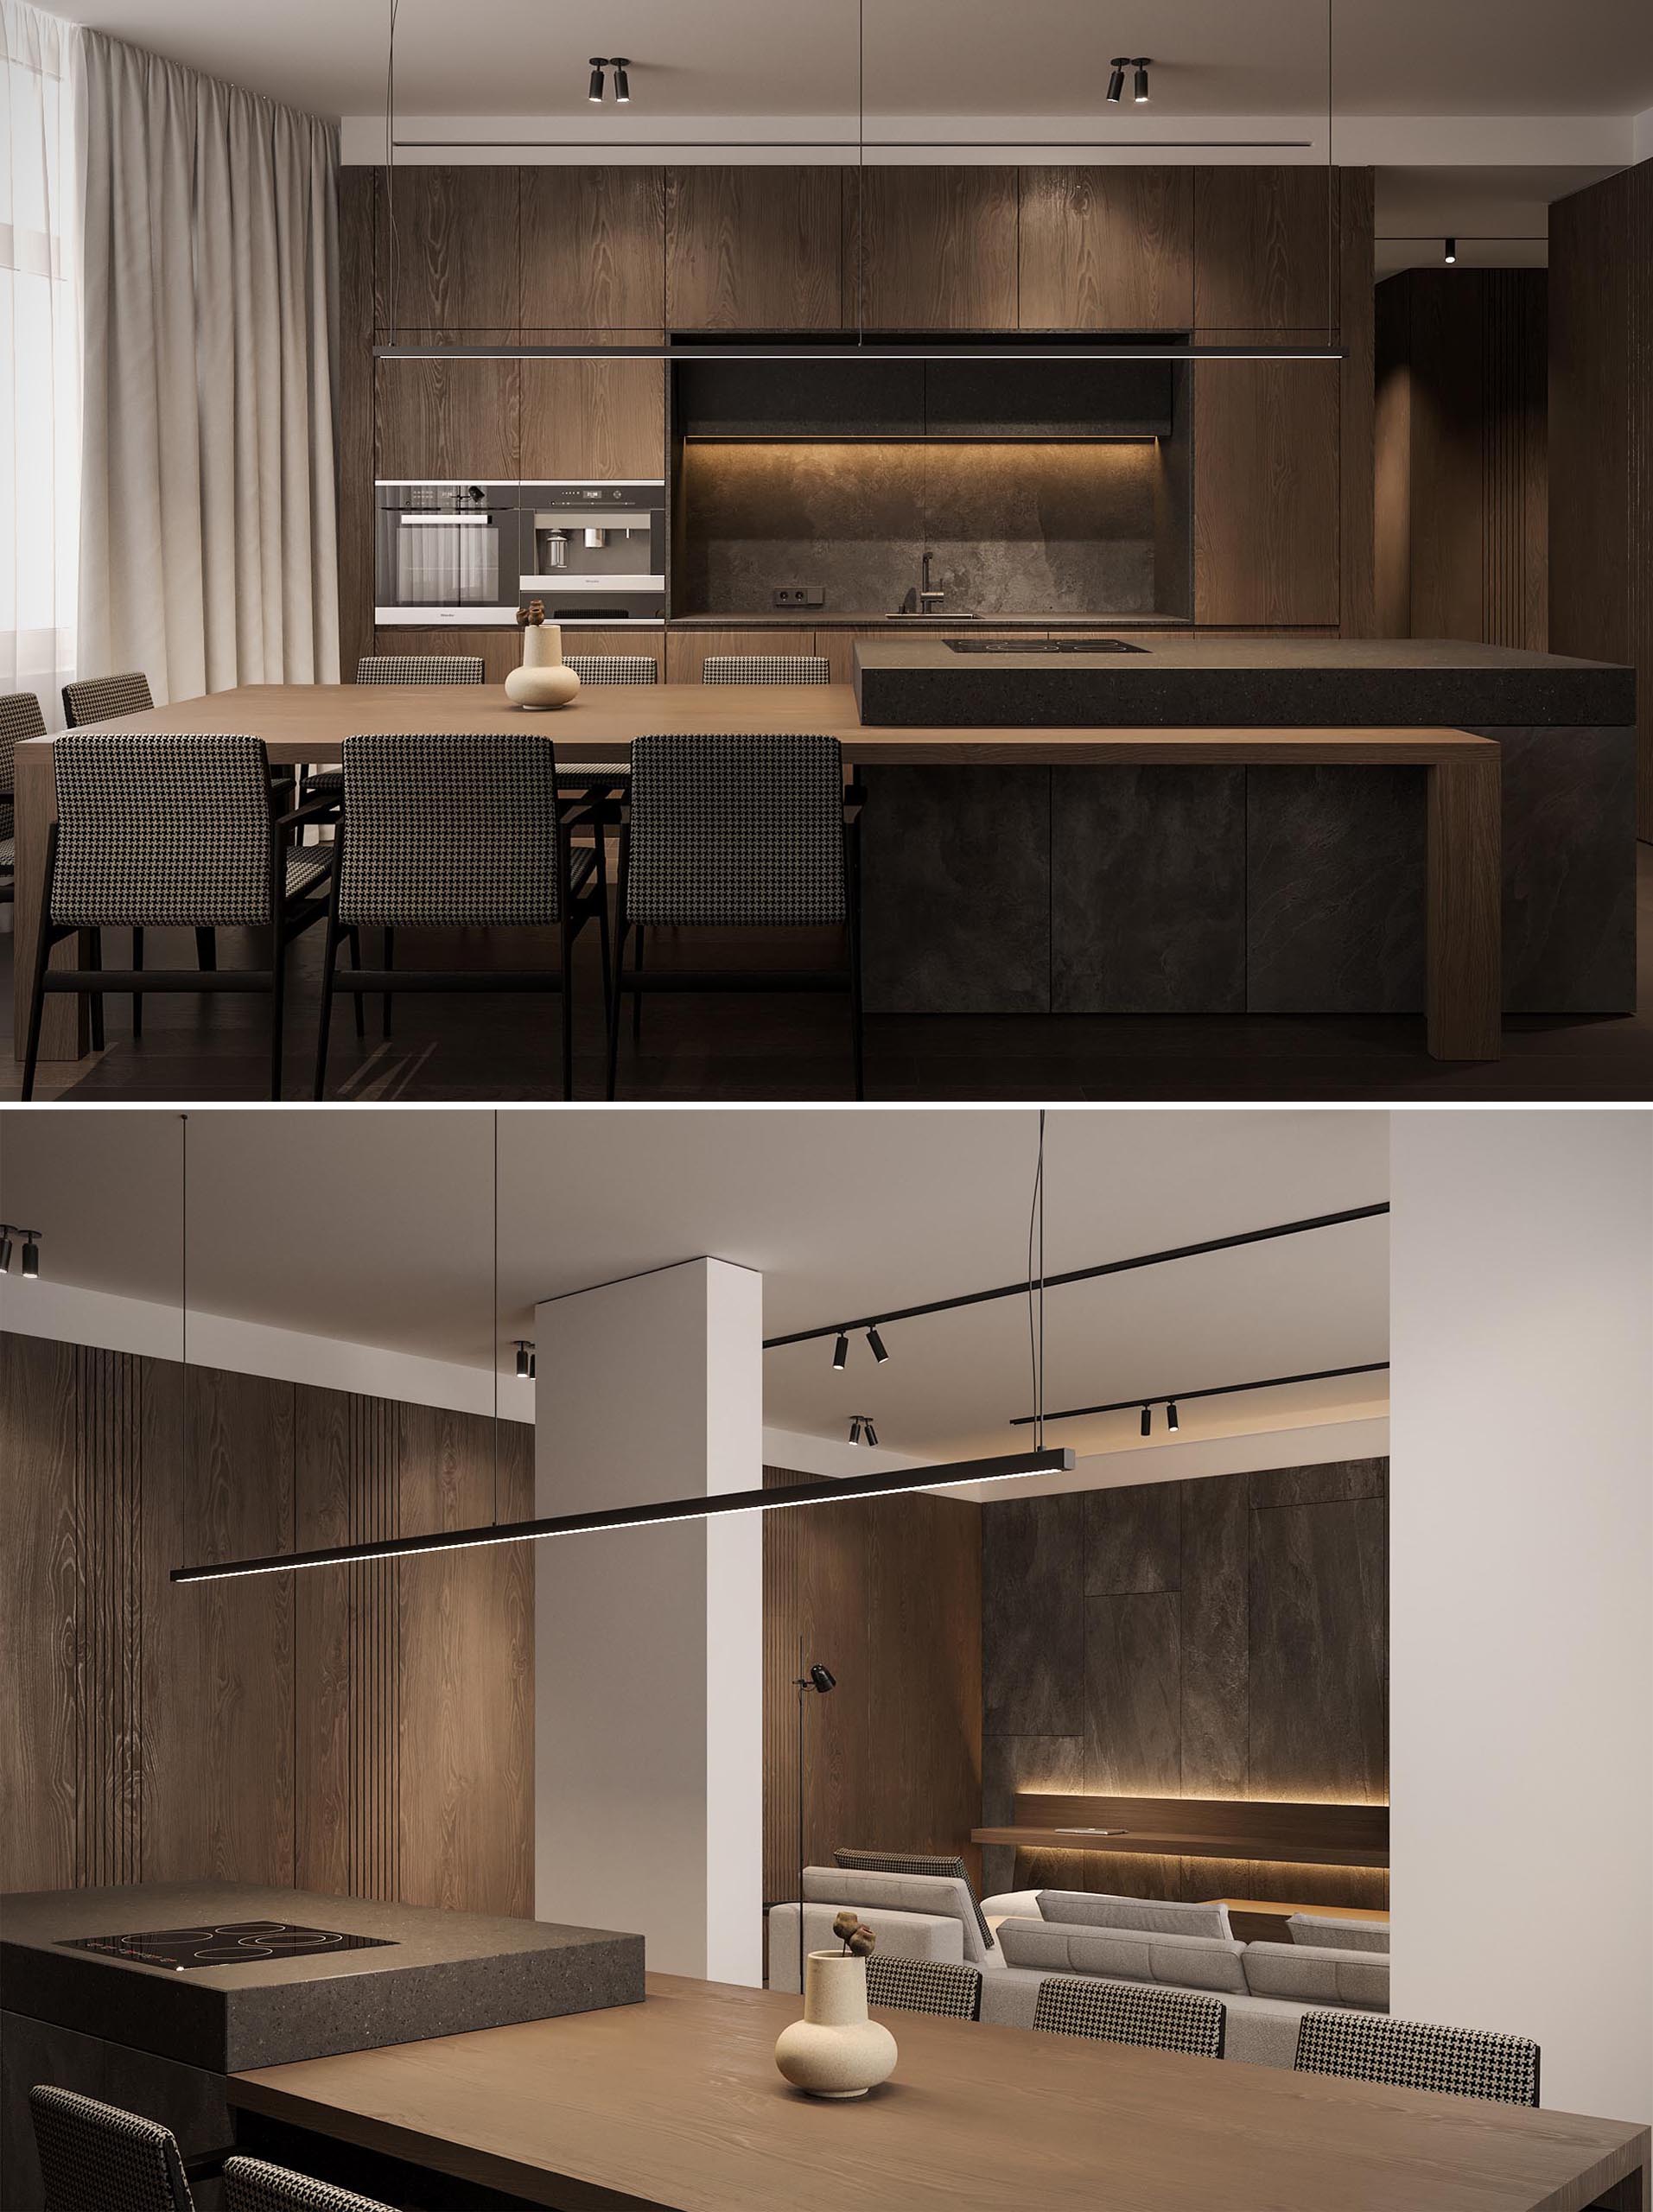 A spacious wood kitchen with black accents has a large island with an extension for seating 8 people.